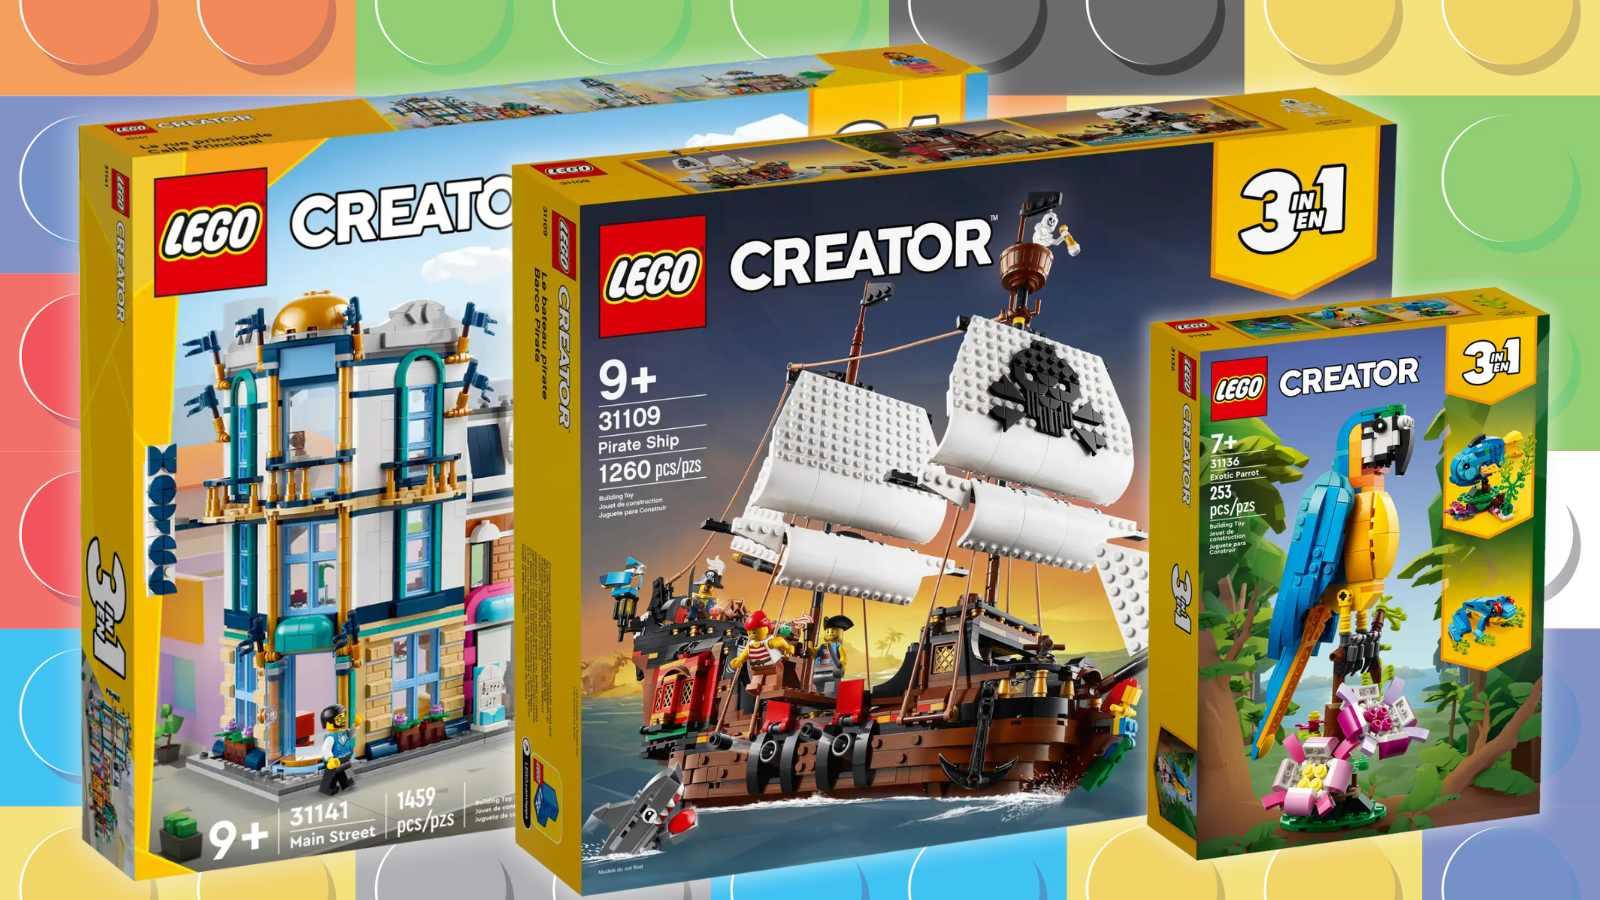 Three LEGO Creator 3in1 sets on a LEGO-inspired background.